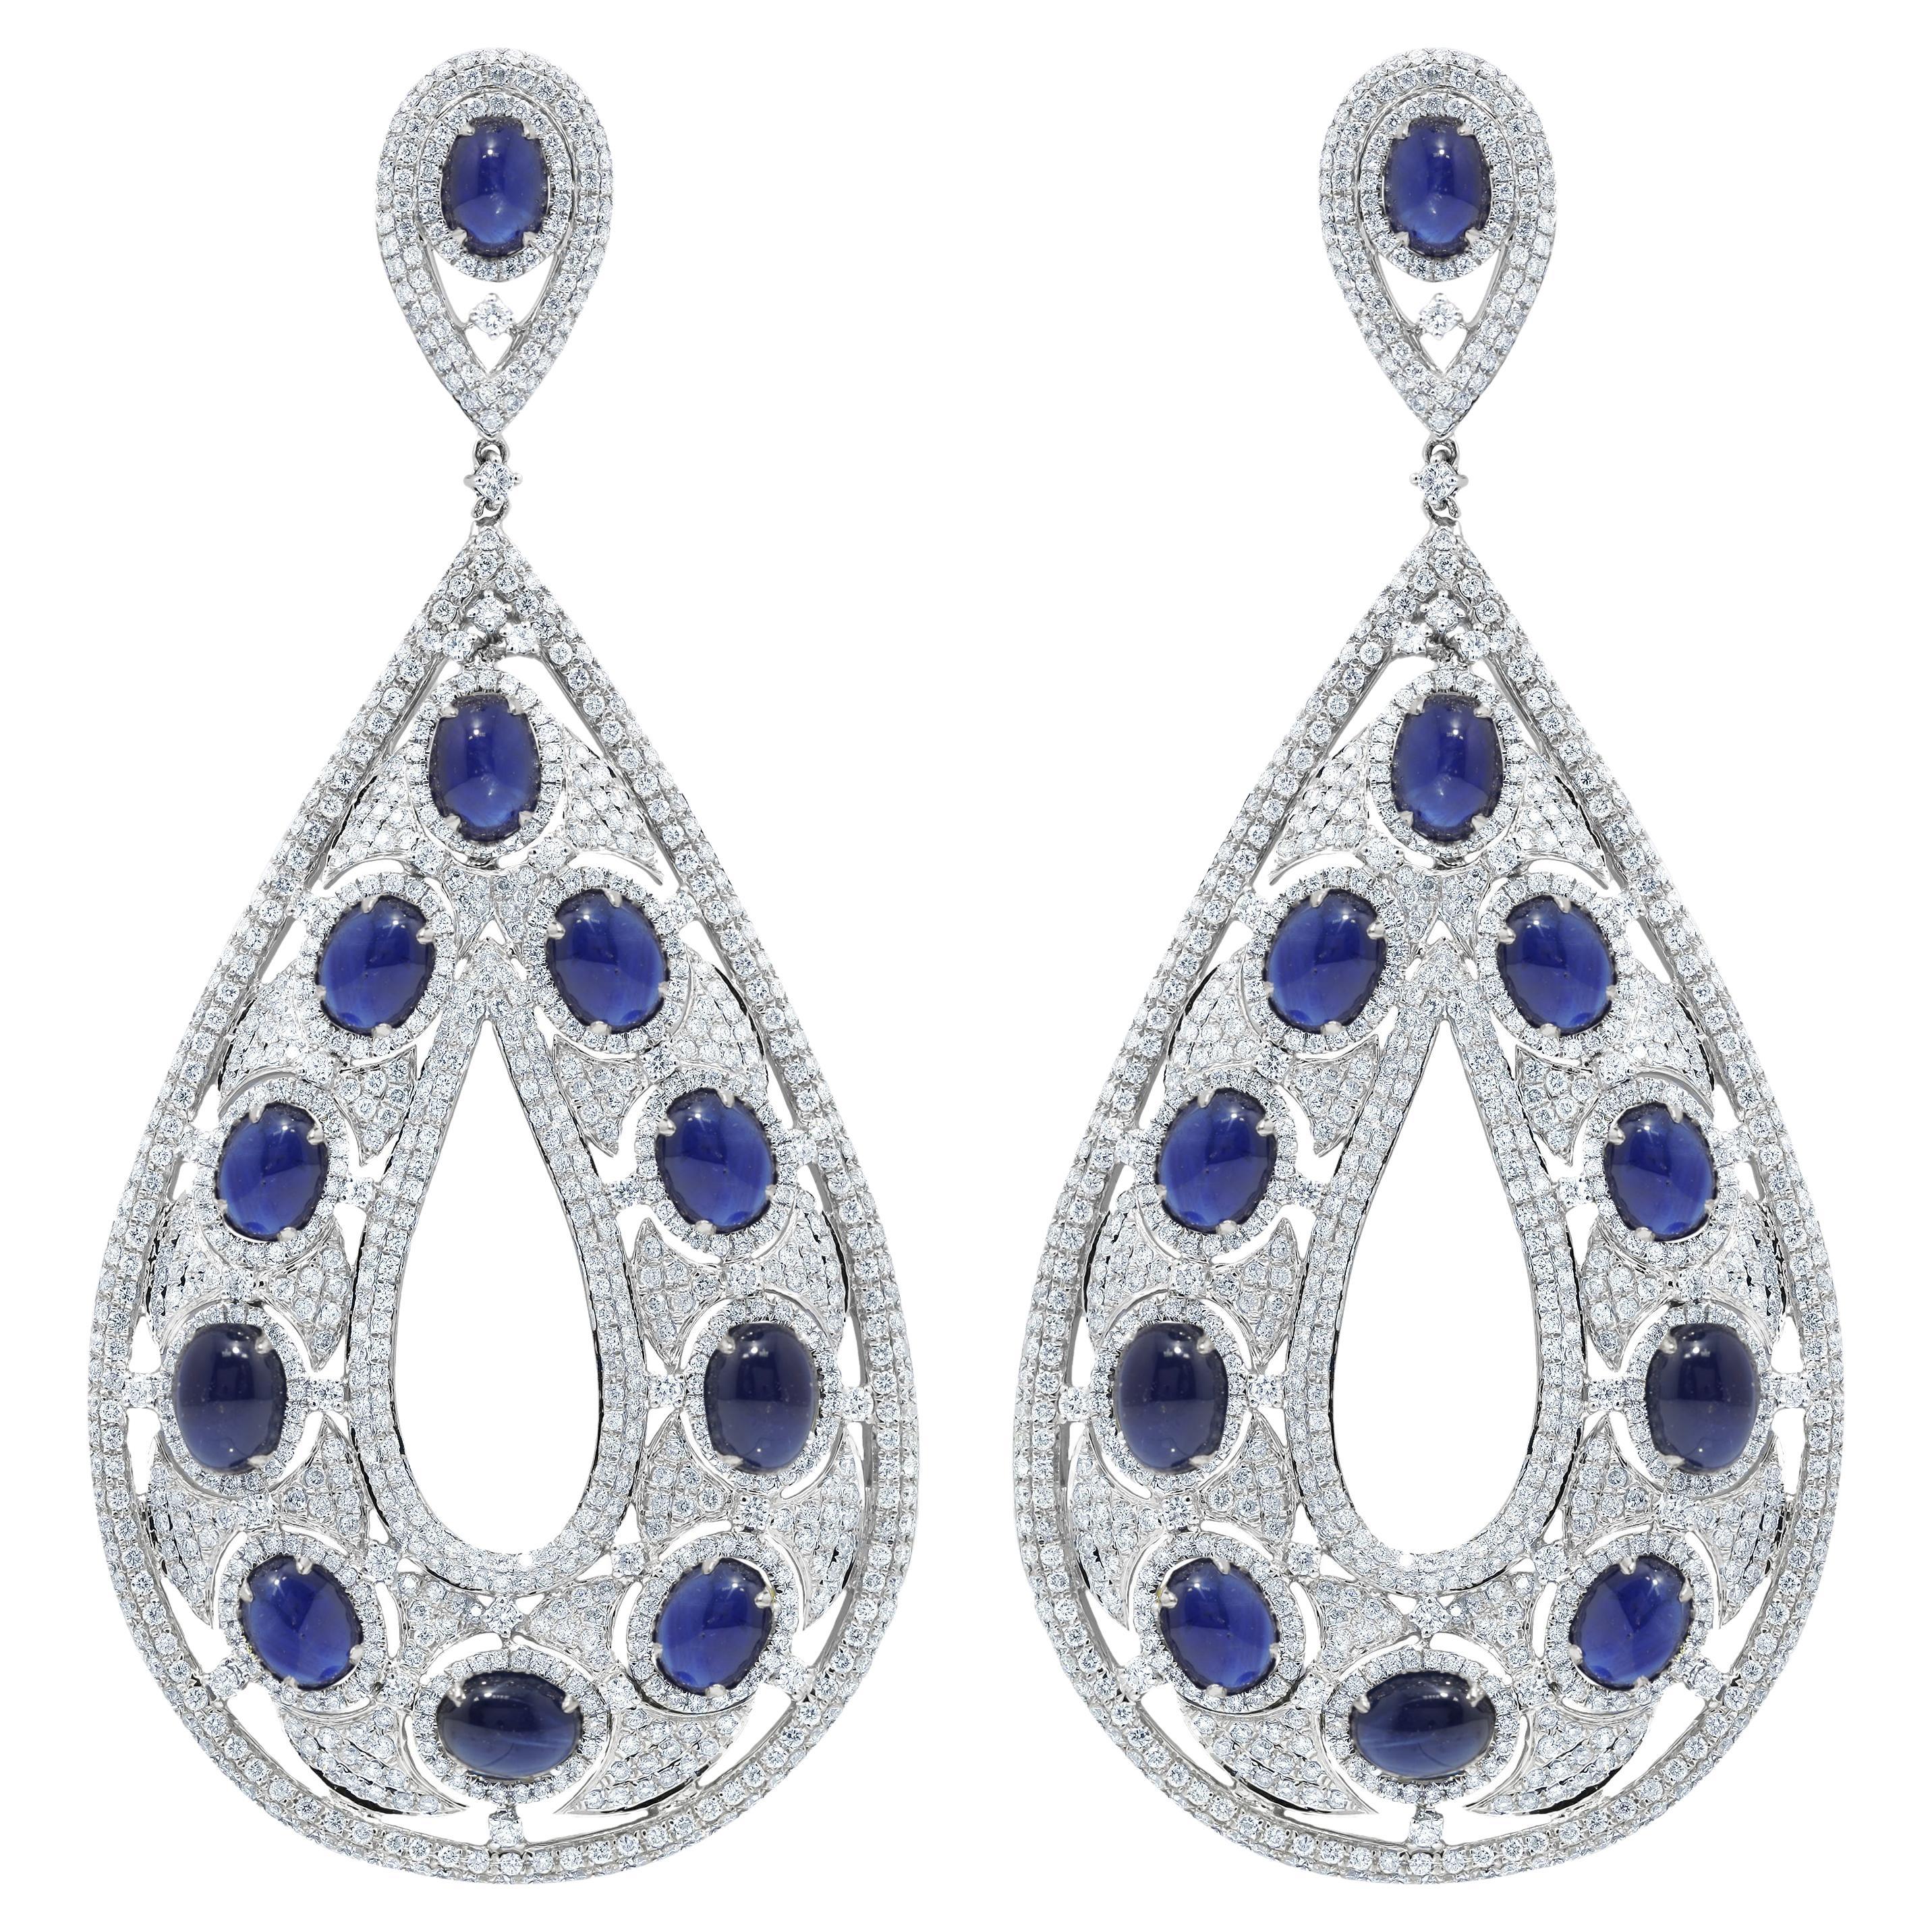 Large cabochon sapphires and Diamond Earrings